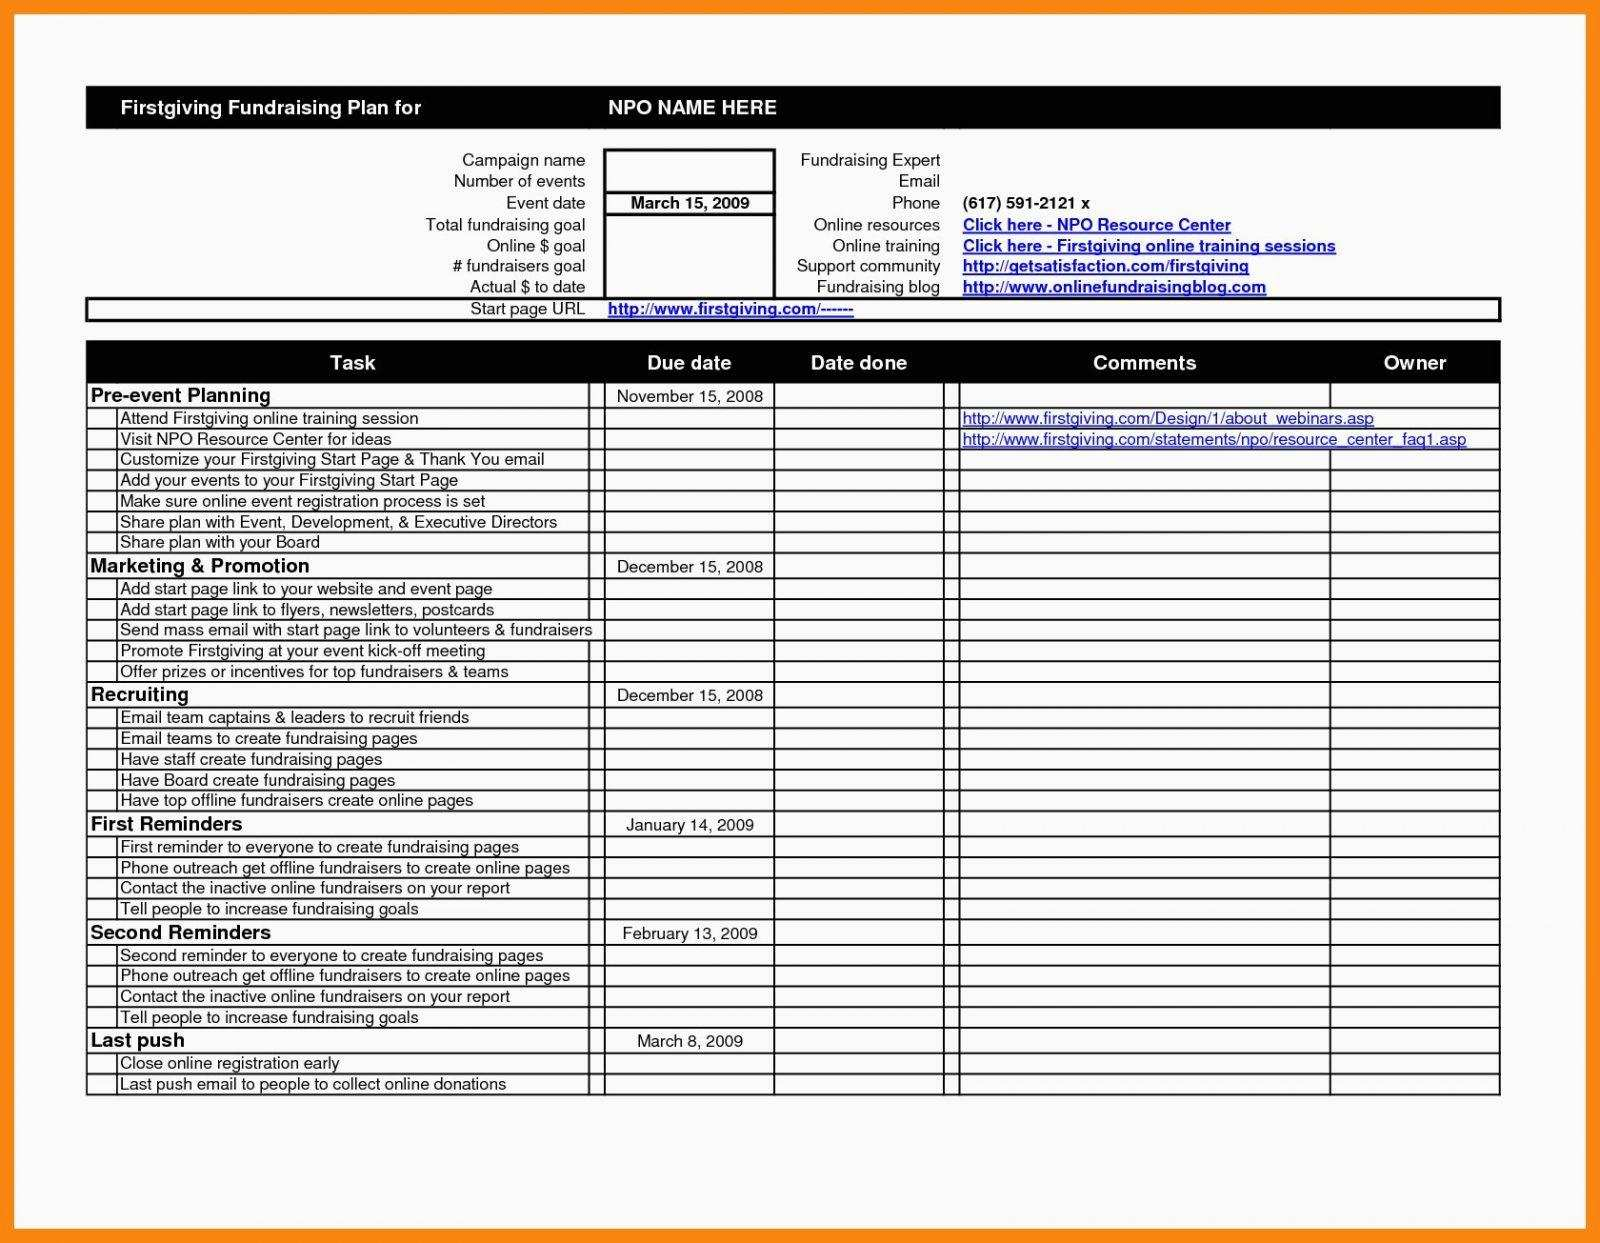 Fundraising Spreadsheet Excel Within 004 Fundraising Plan Template Excel Conference Planning Event